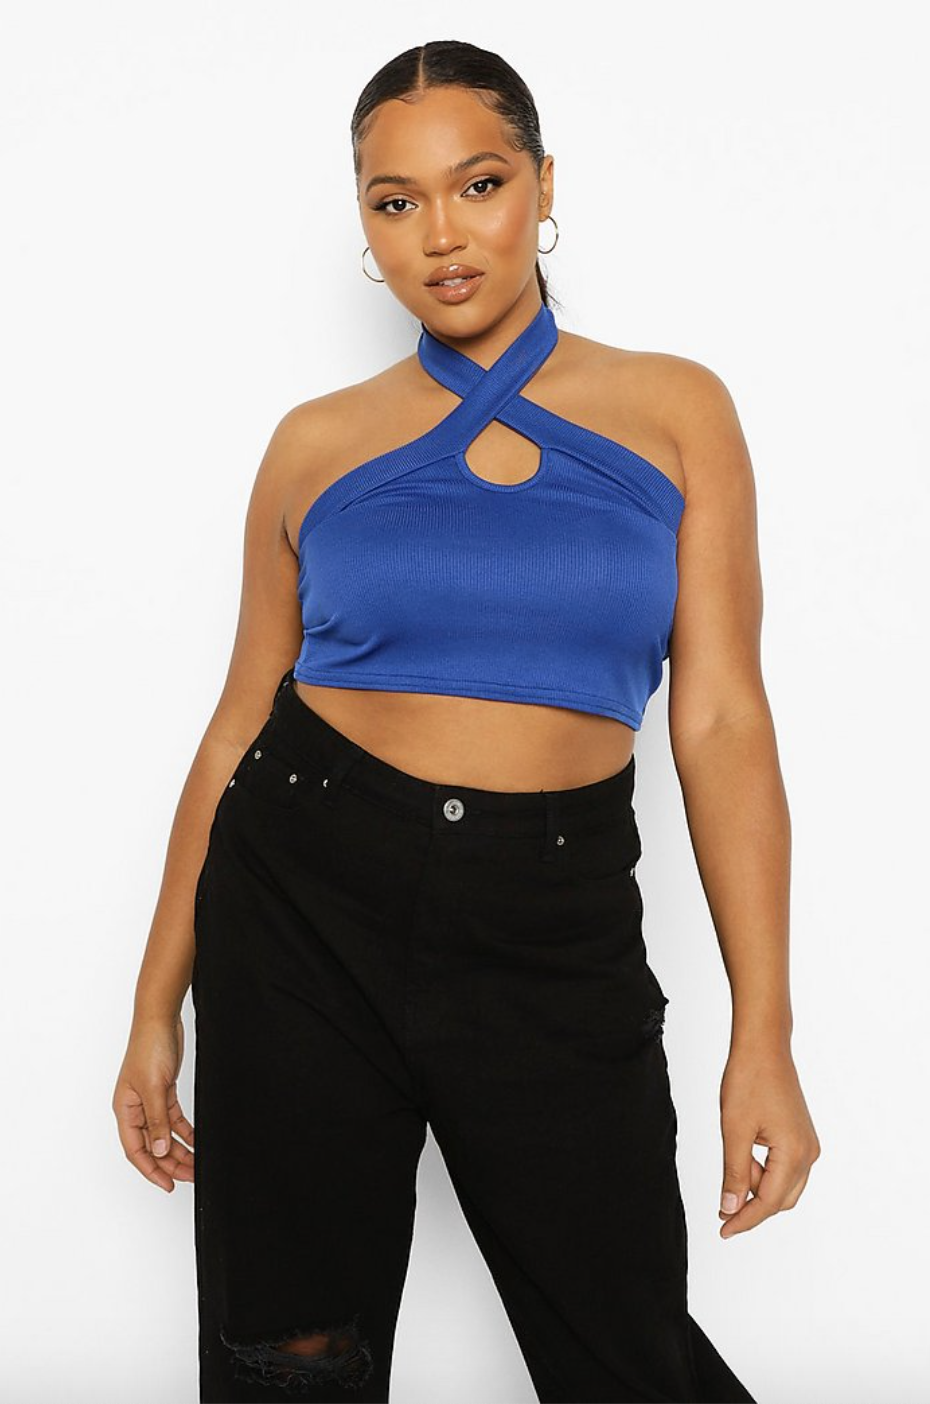 plus size model wearing a crop halter top shirt with a keyhole detail styled with high-waist jeans